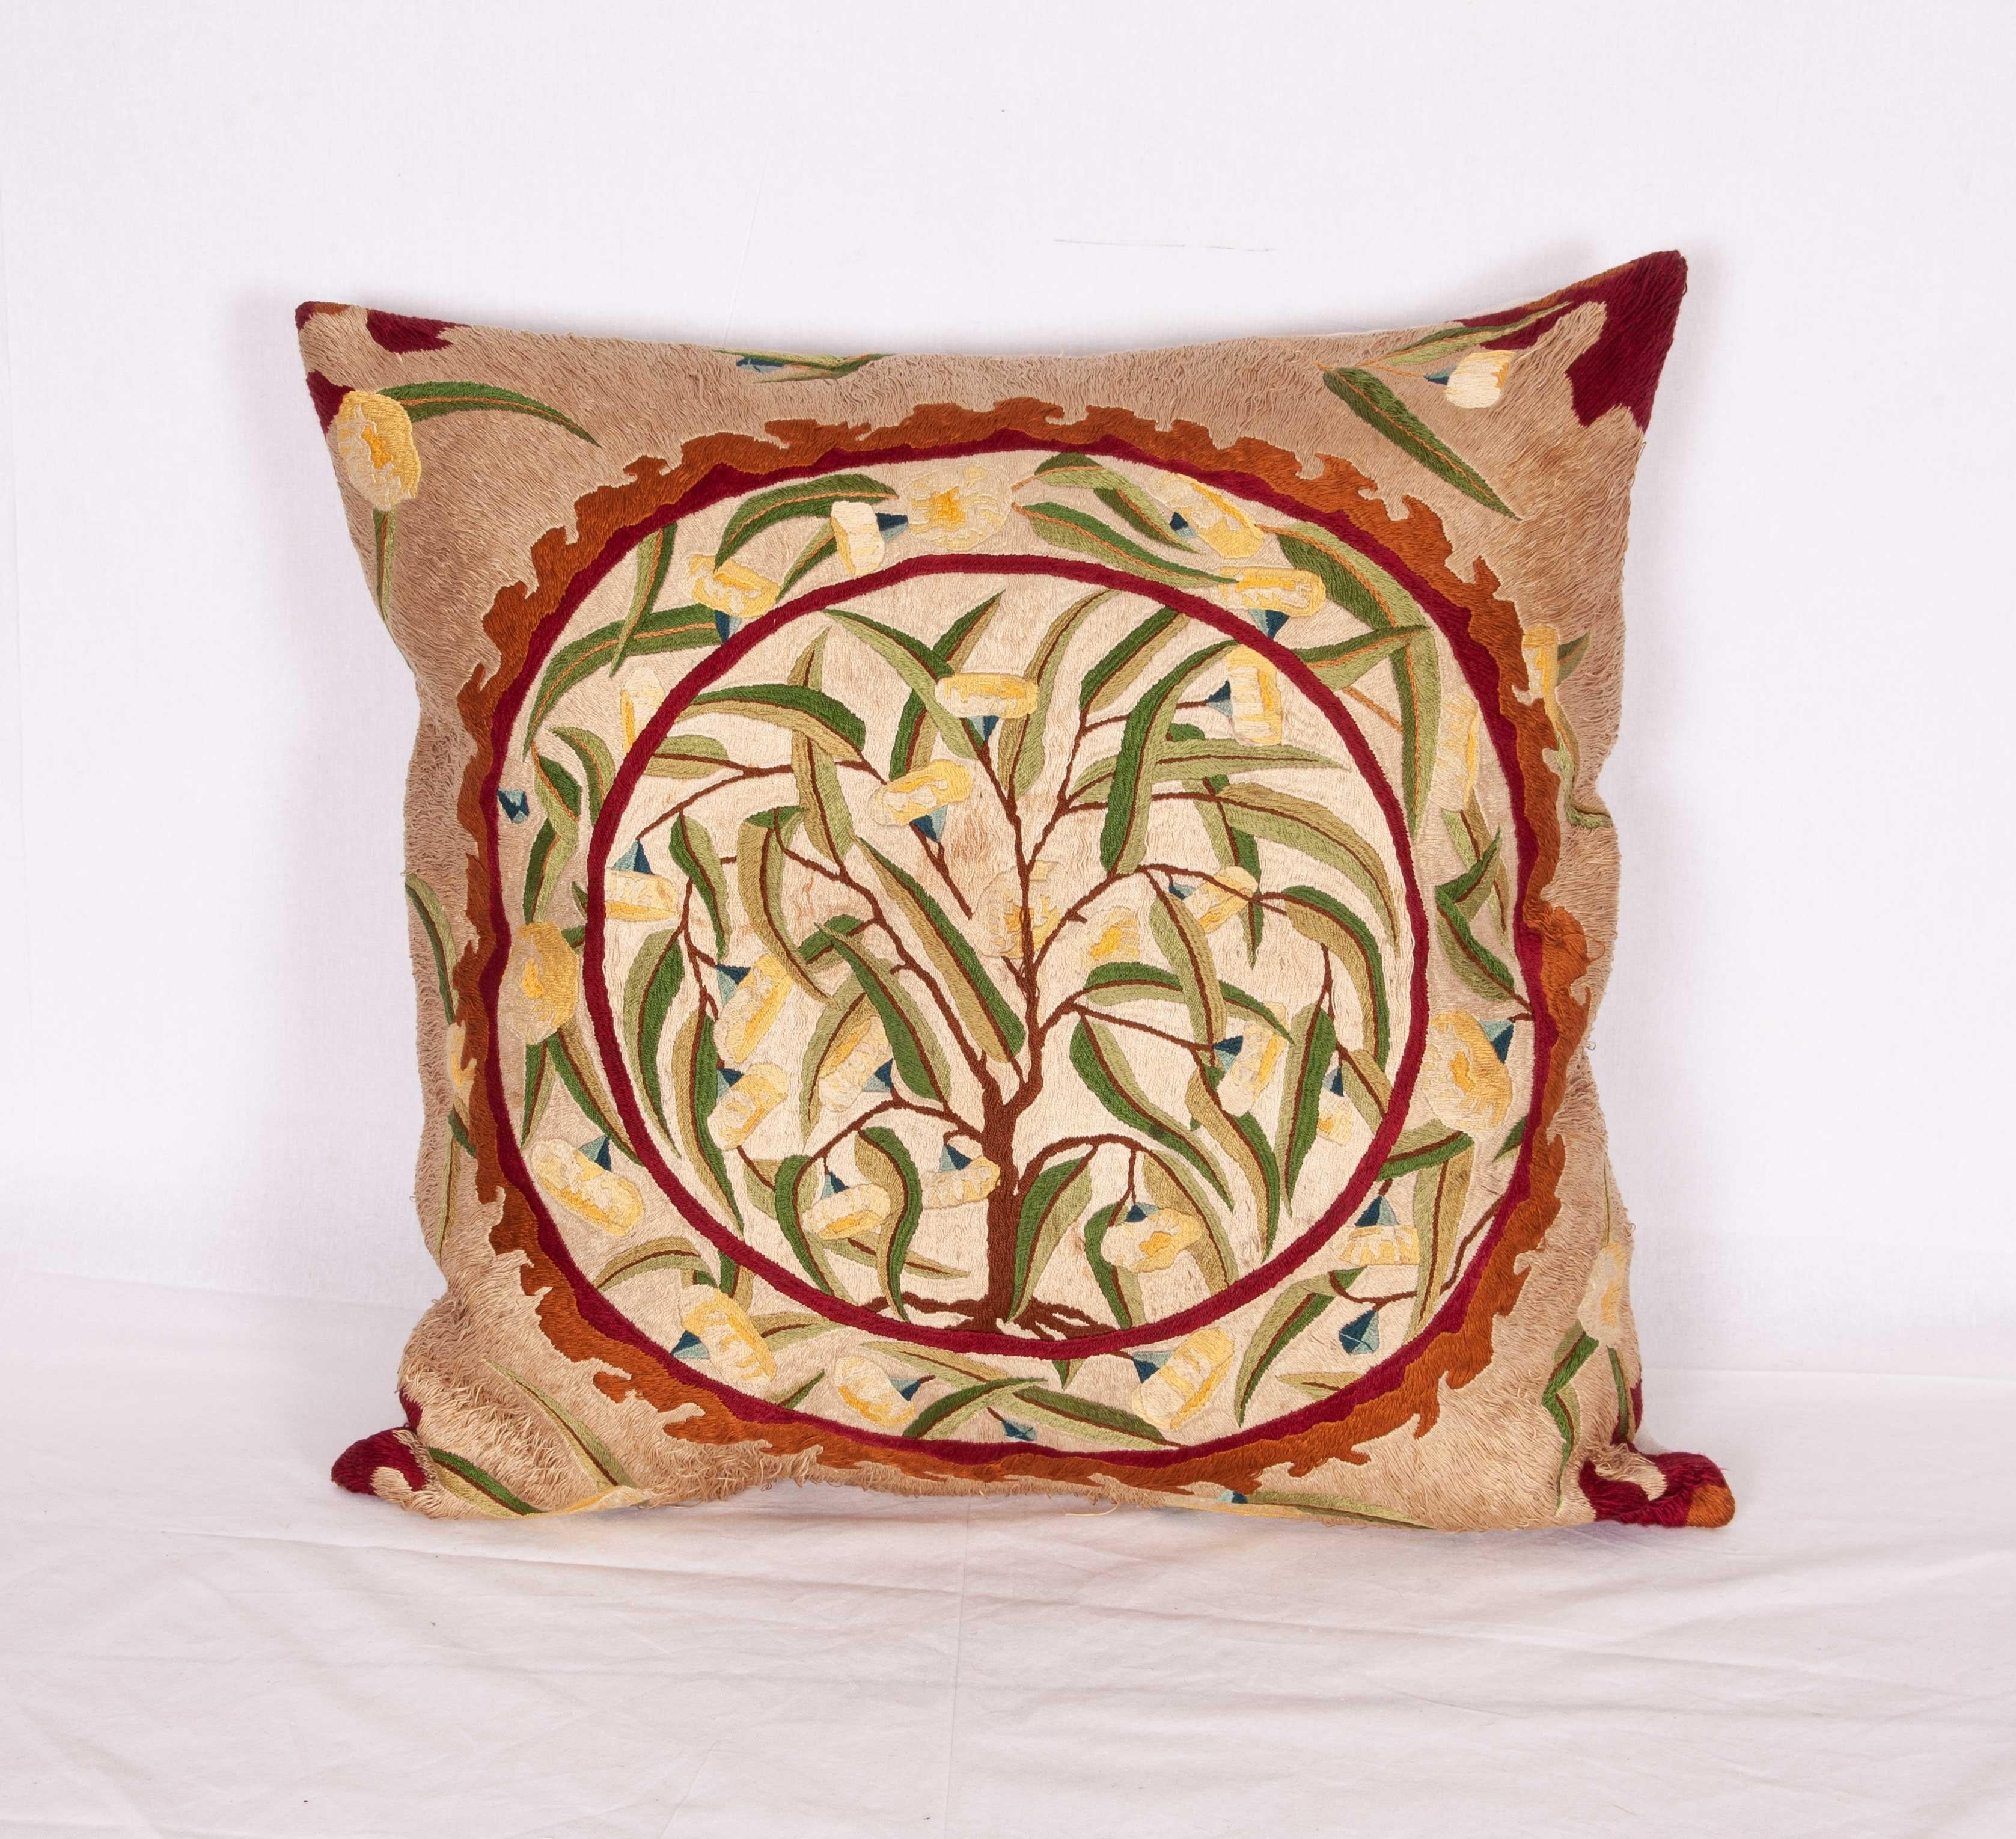 Suzani Pillow Case Fashioned from an Early 20th Century European Embroidery